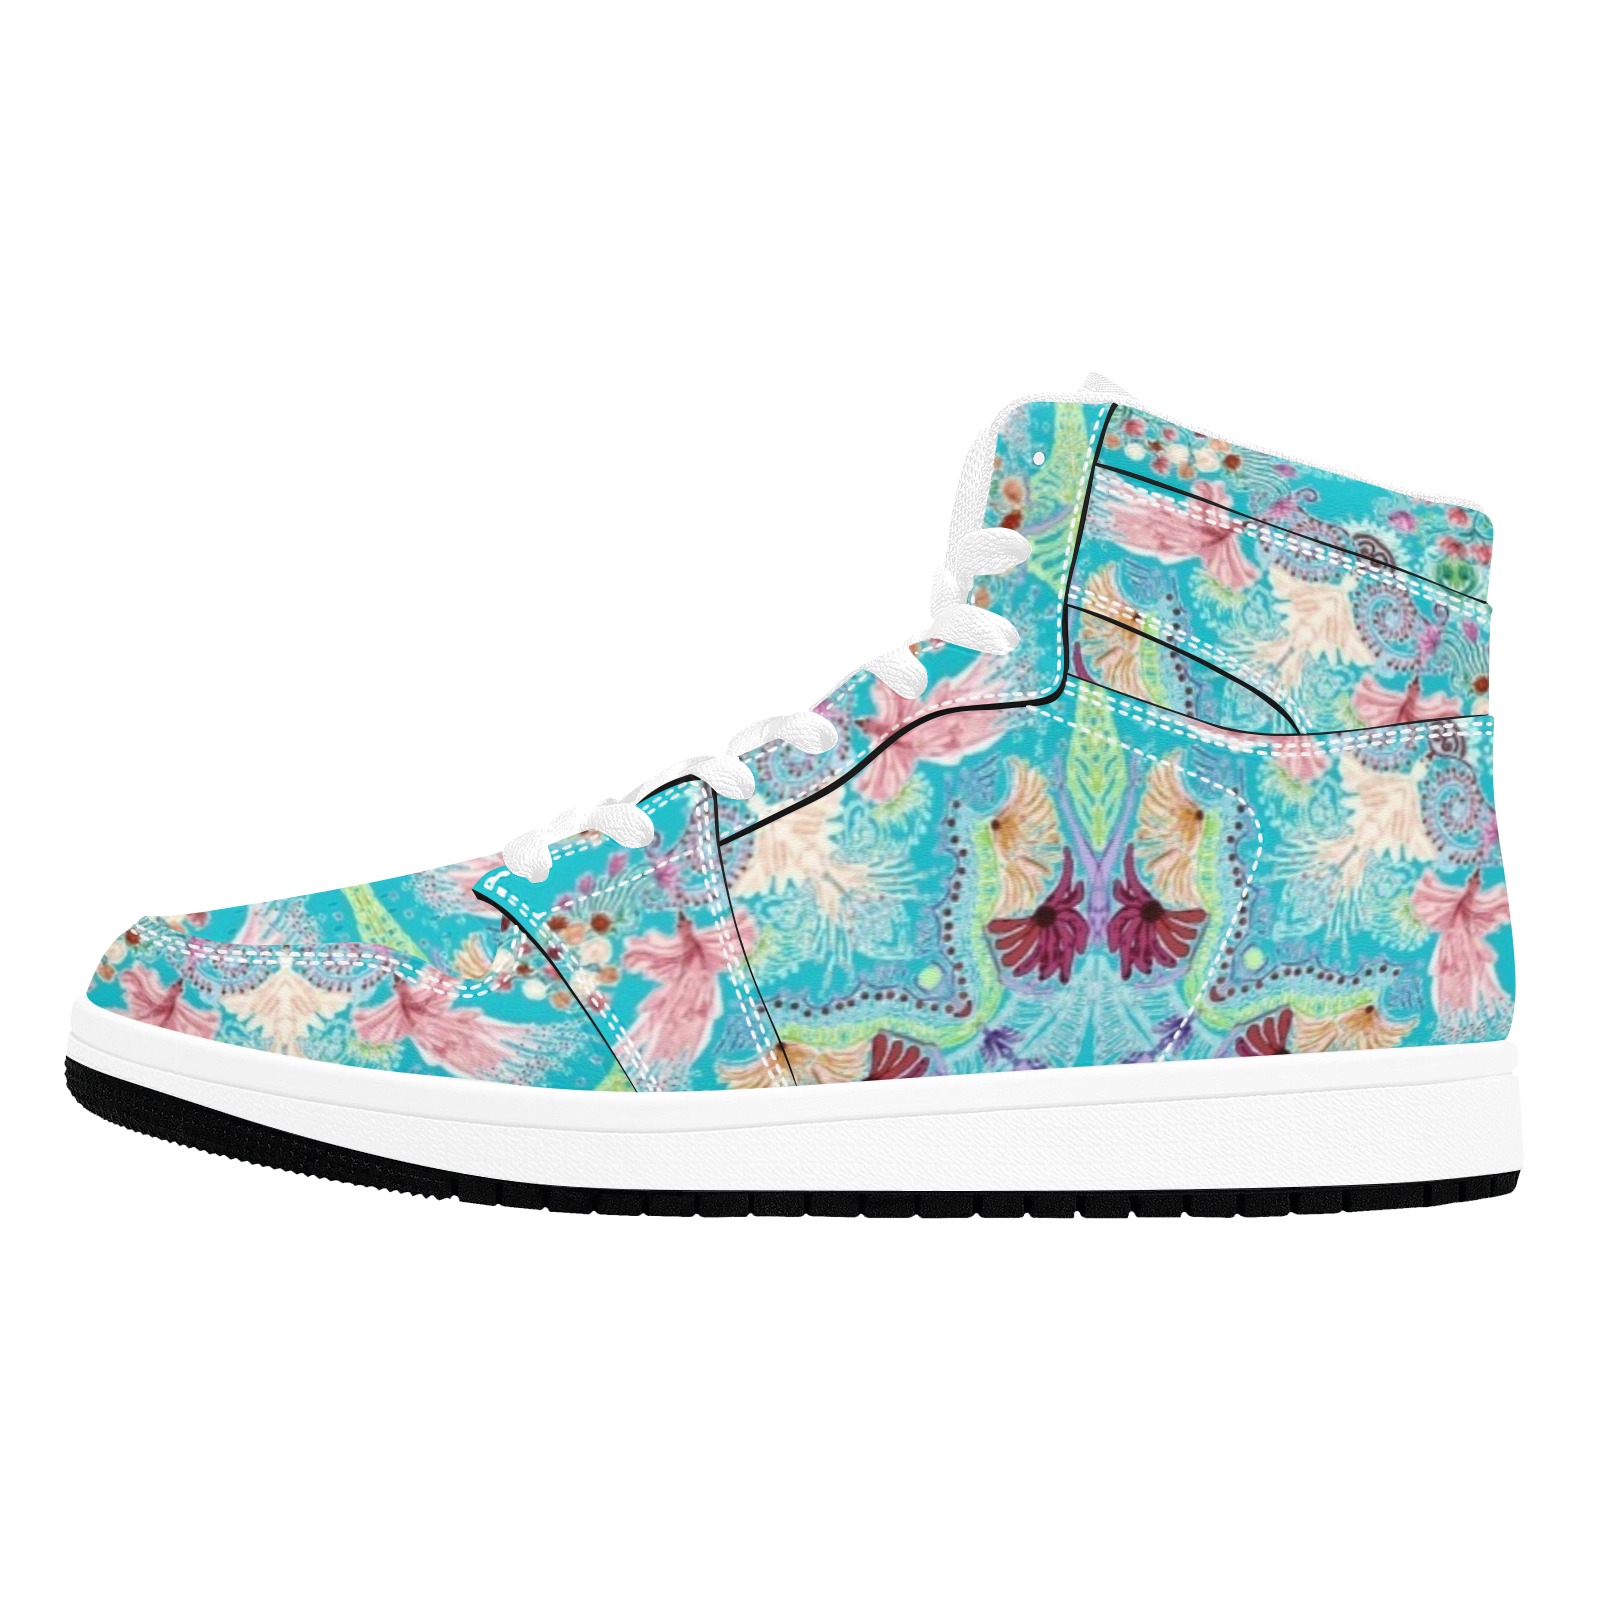 sweet nature-background blue Men's High Top Sneakers (Model 20042)